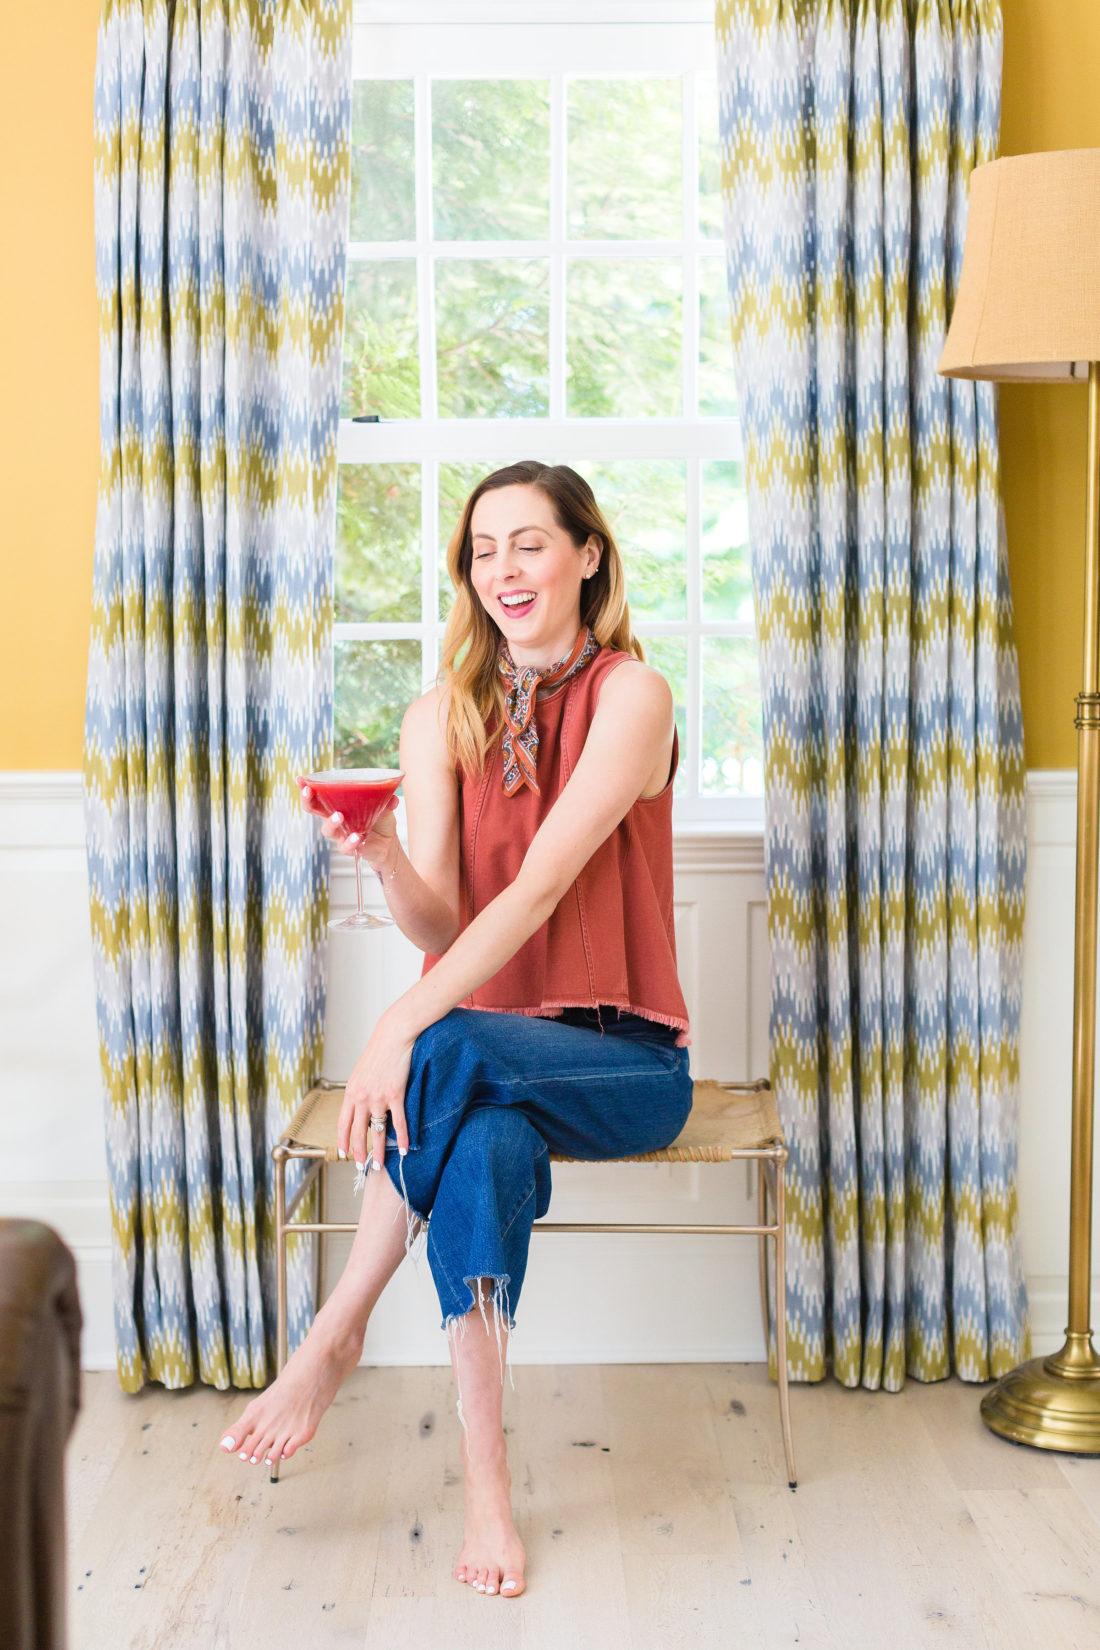 Eva Amurri Martino sits in the living room of her Connecticut home, sipping a blood orange and ginger martini